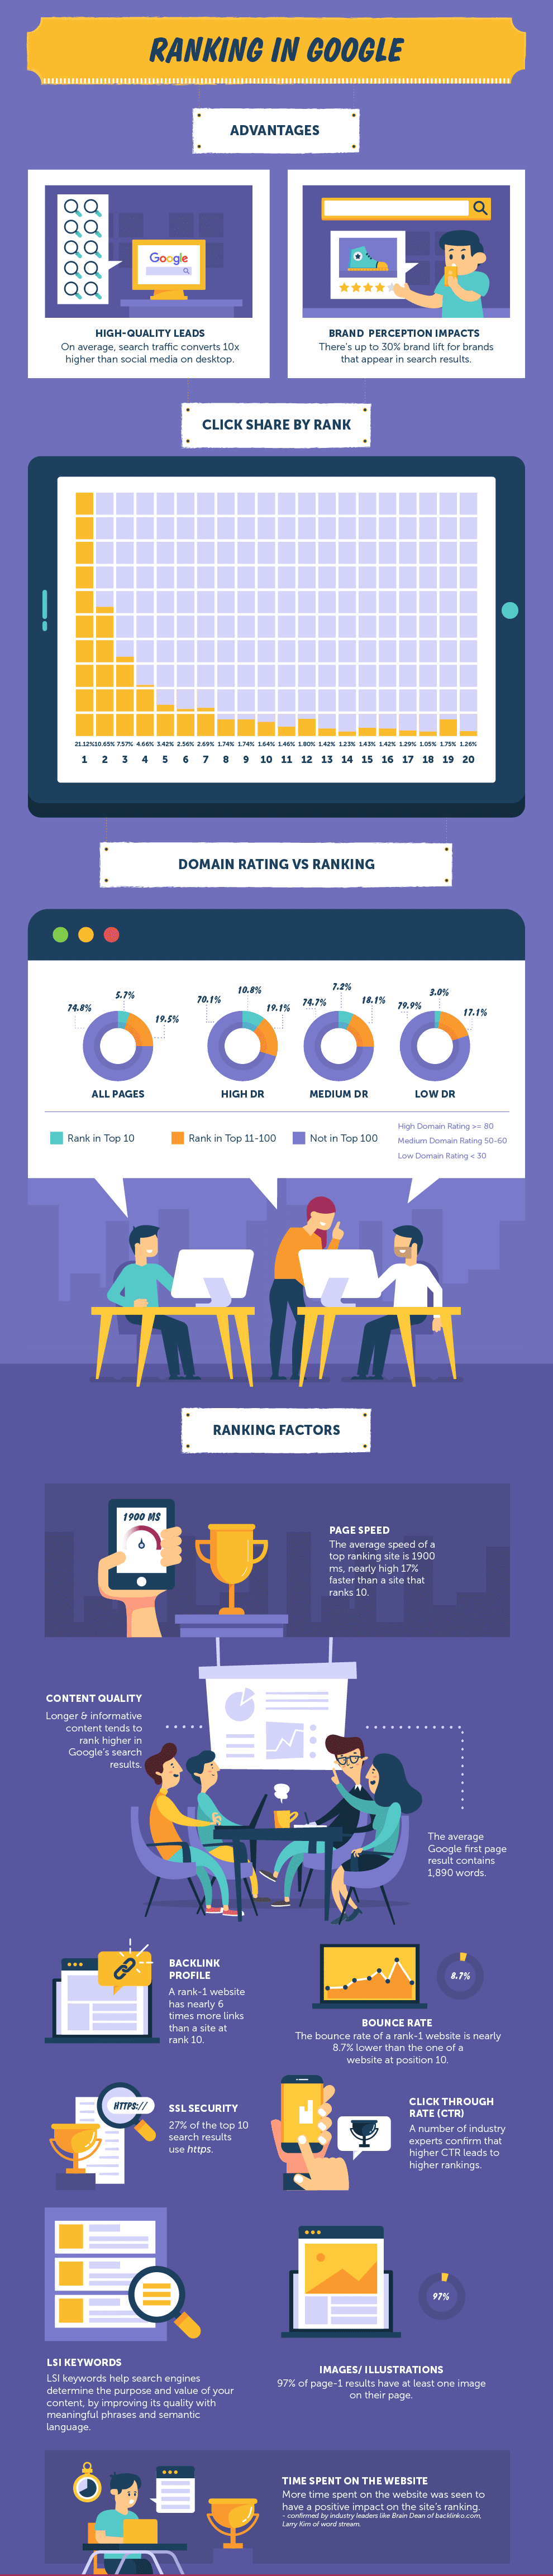 ranking in google infographic